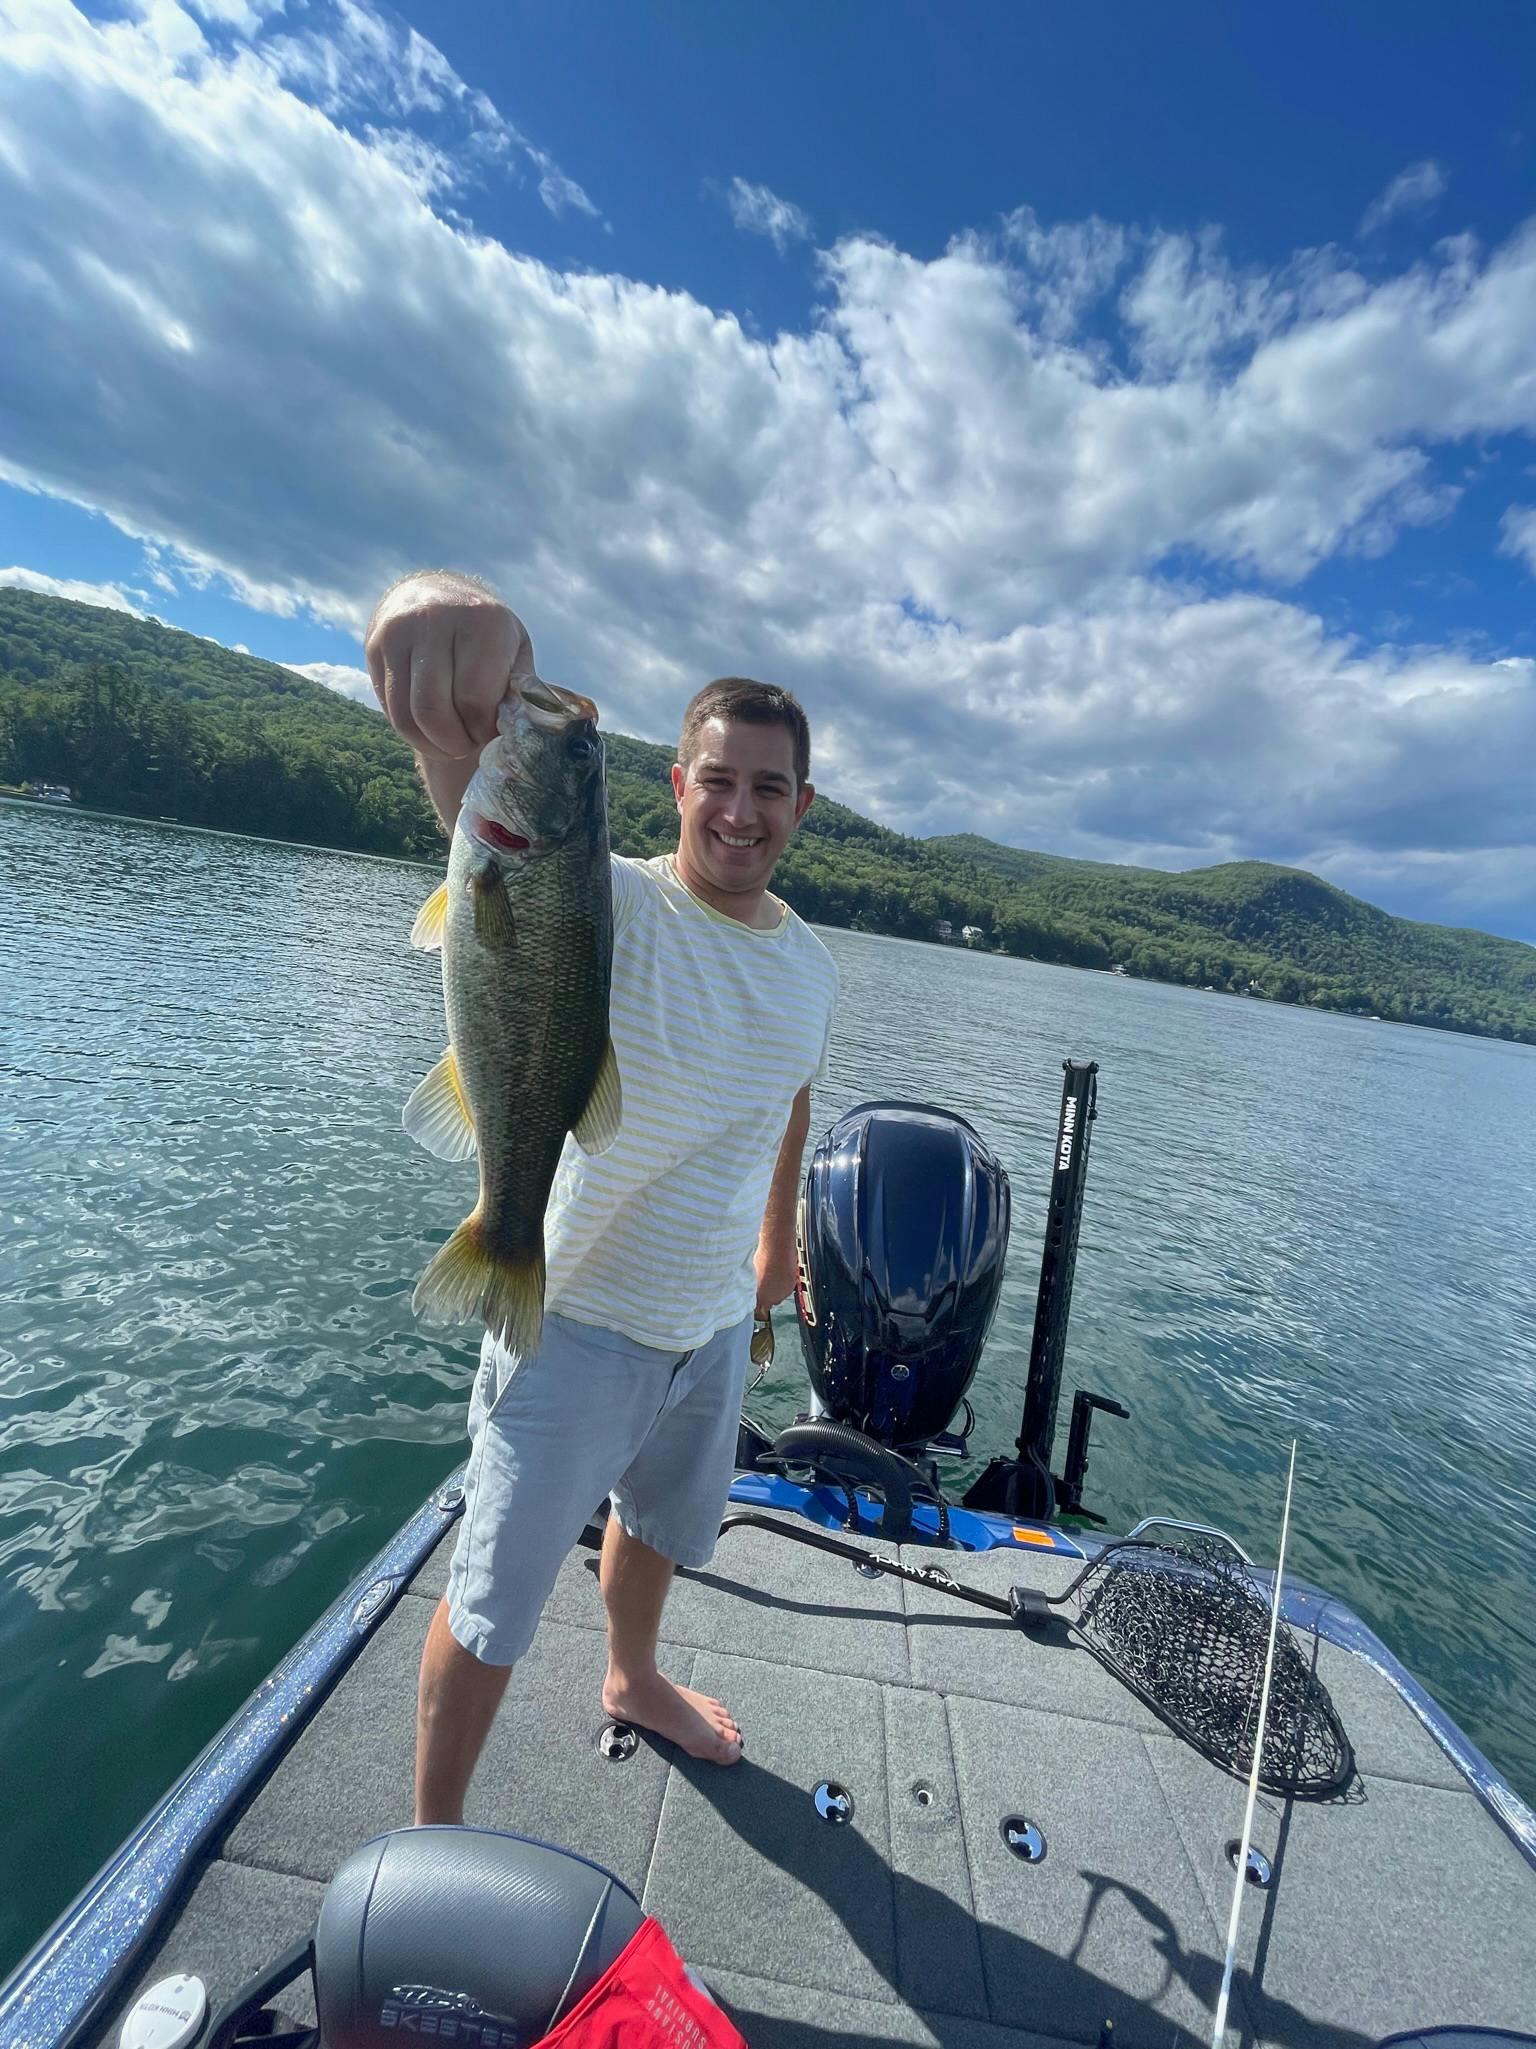 Man with no shoes, grey shorts, and white shirt holds largemouth bass on blue boat